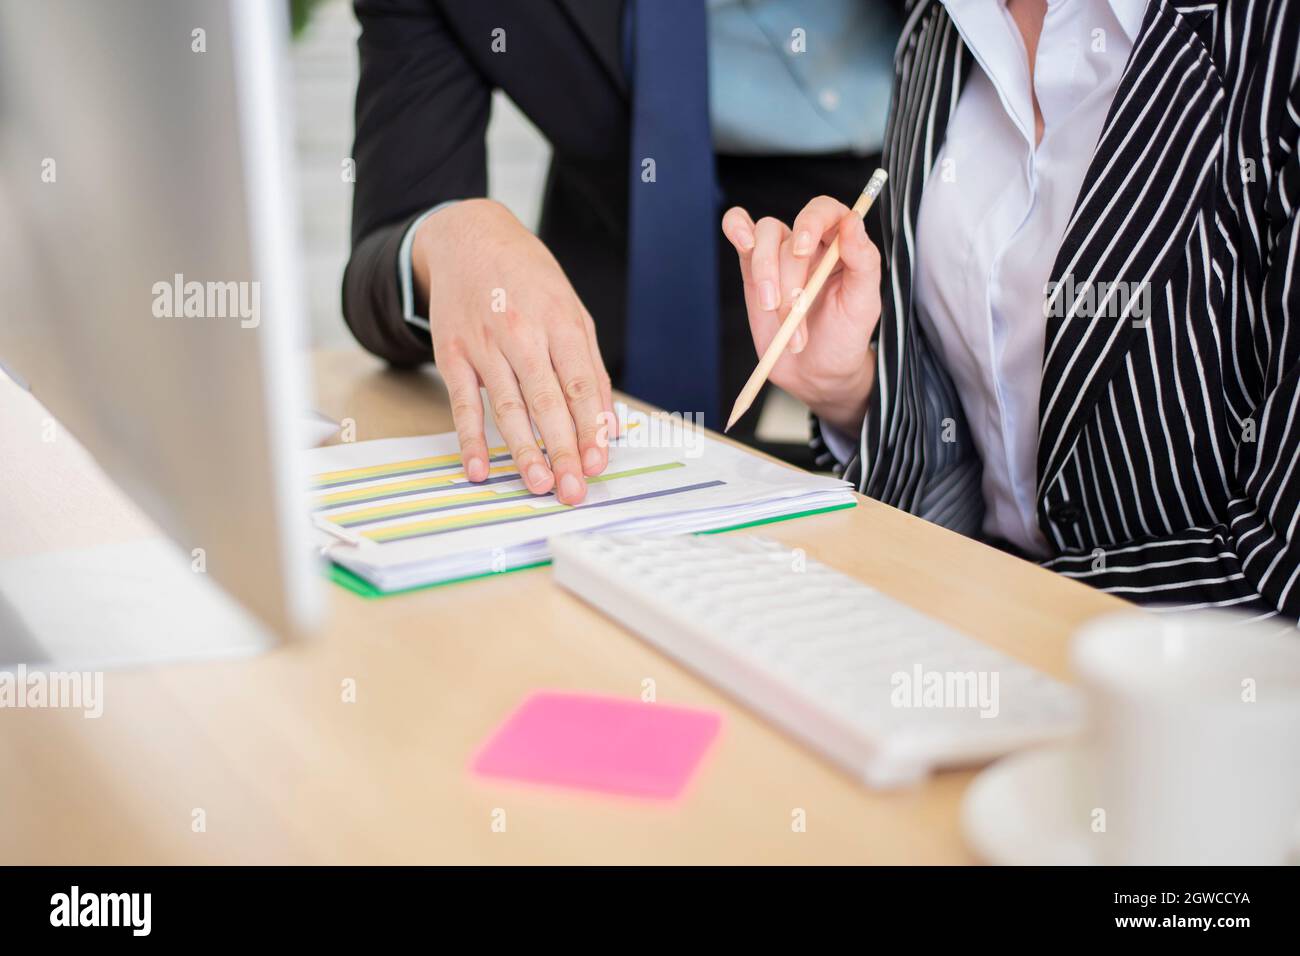 Midsection Of Businesswoman And Colleague Working In Office Stock Photo